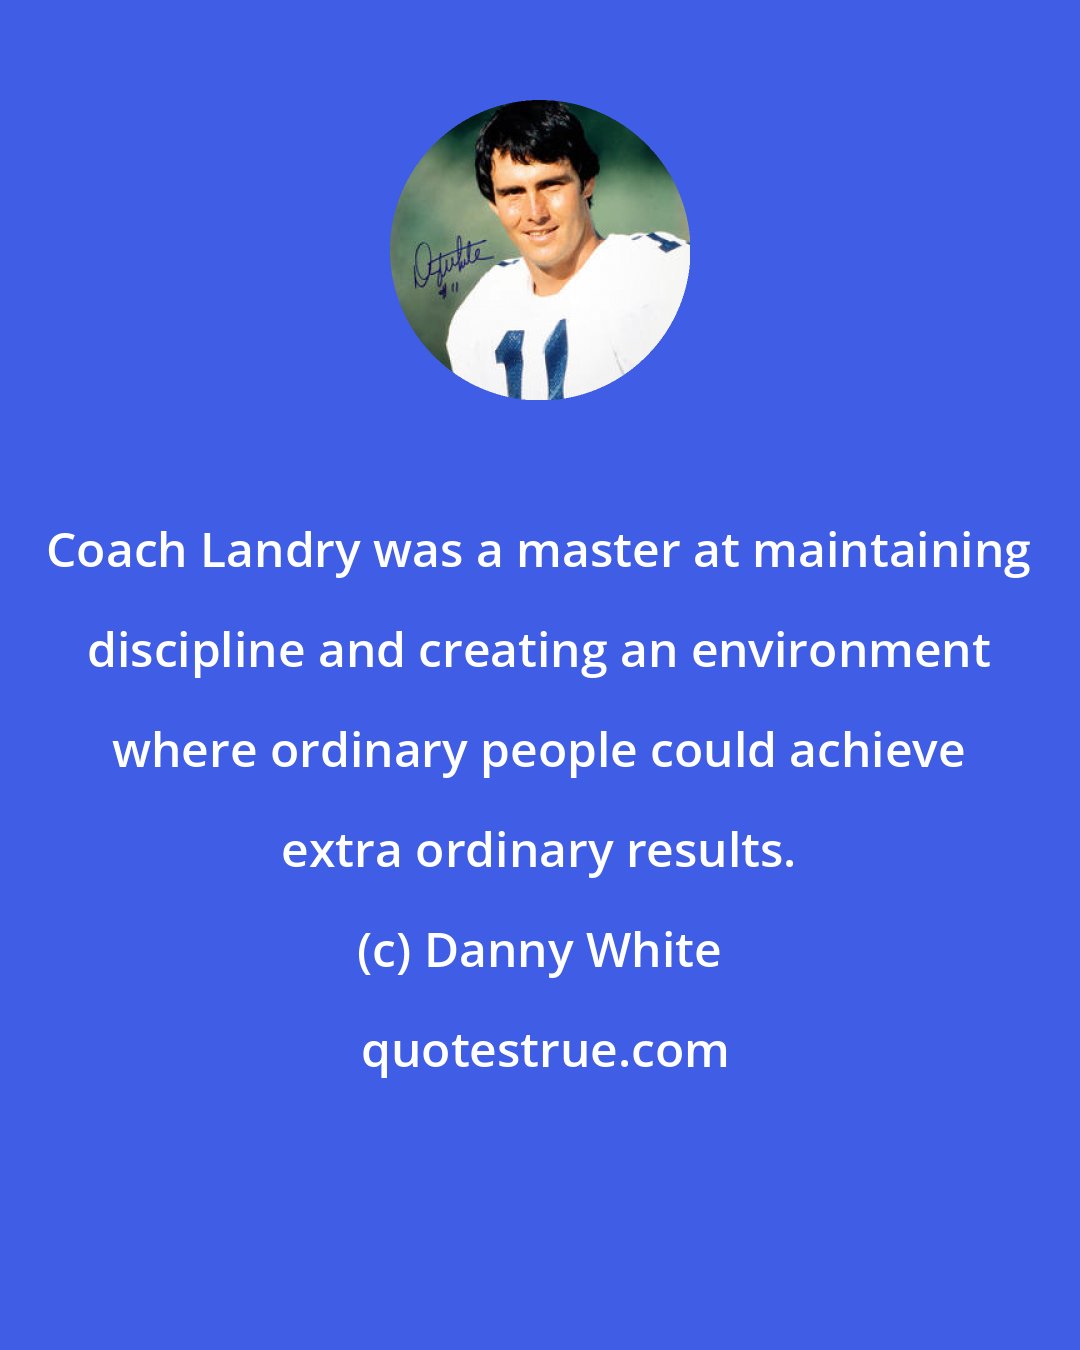 Danny White: Coach Landry was a master at maintaining discipline and creating an environment where ordinary people could achieve extra ordinary results.